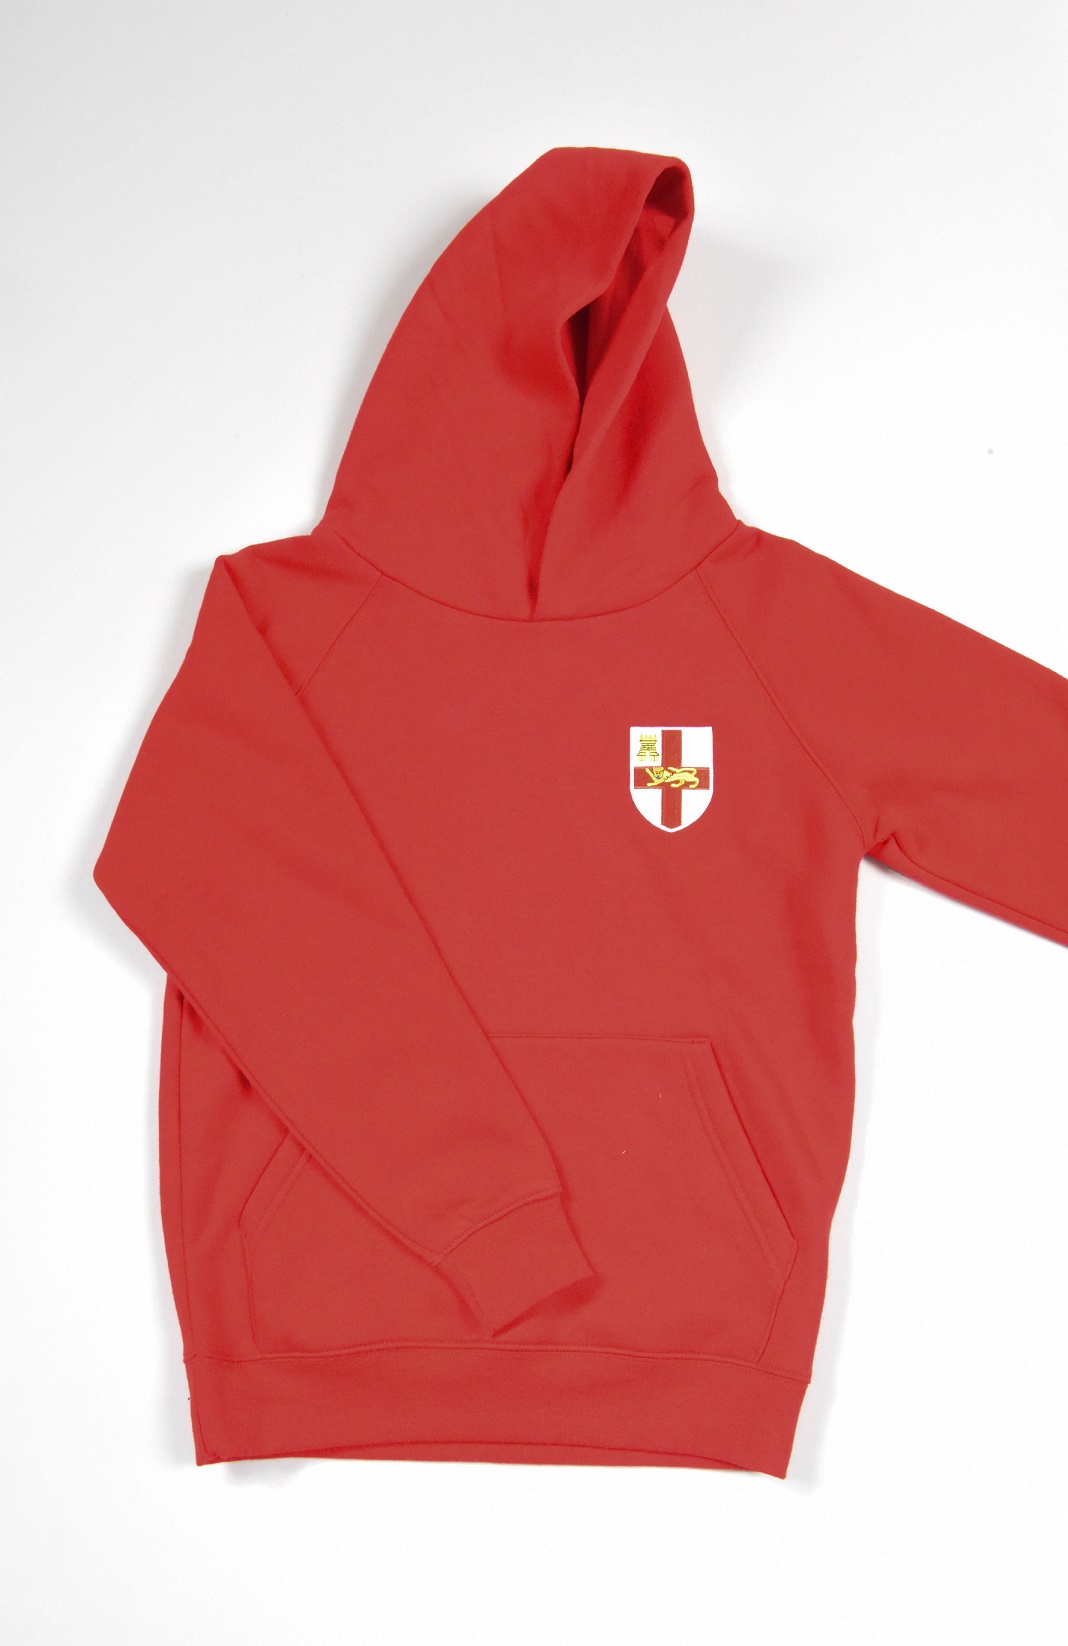 Red Hooded Top with Badge - Age 12/13